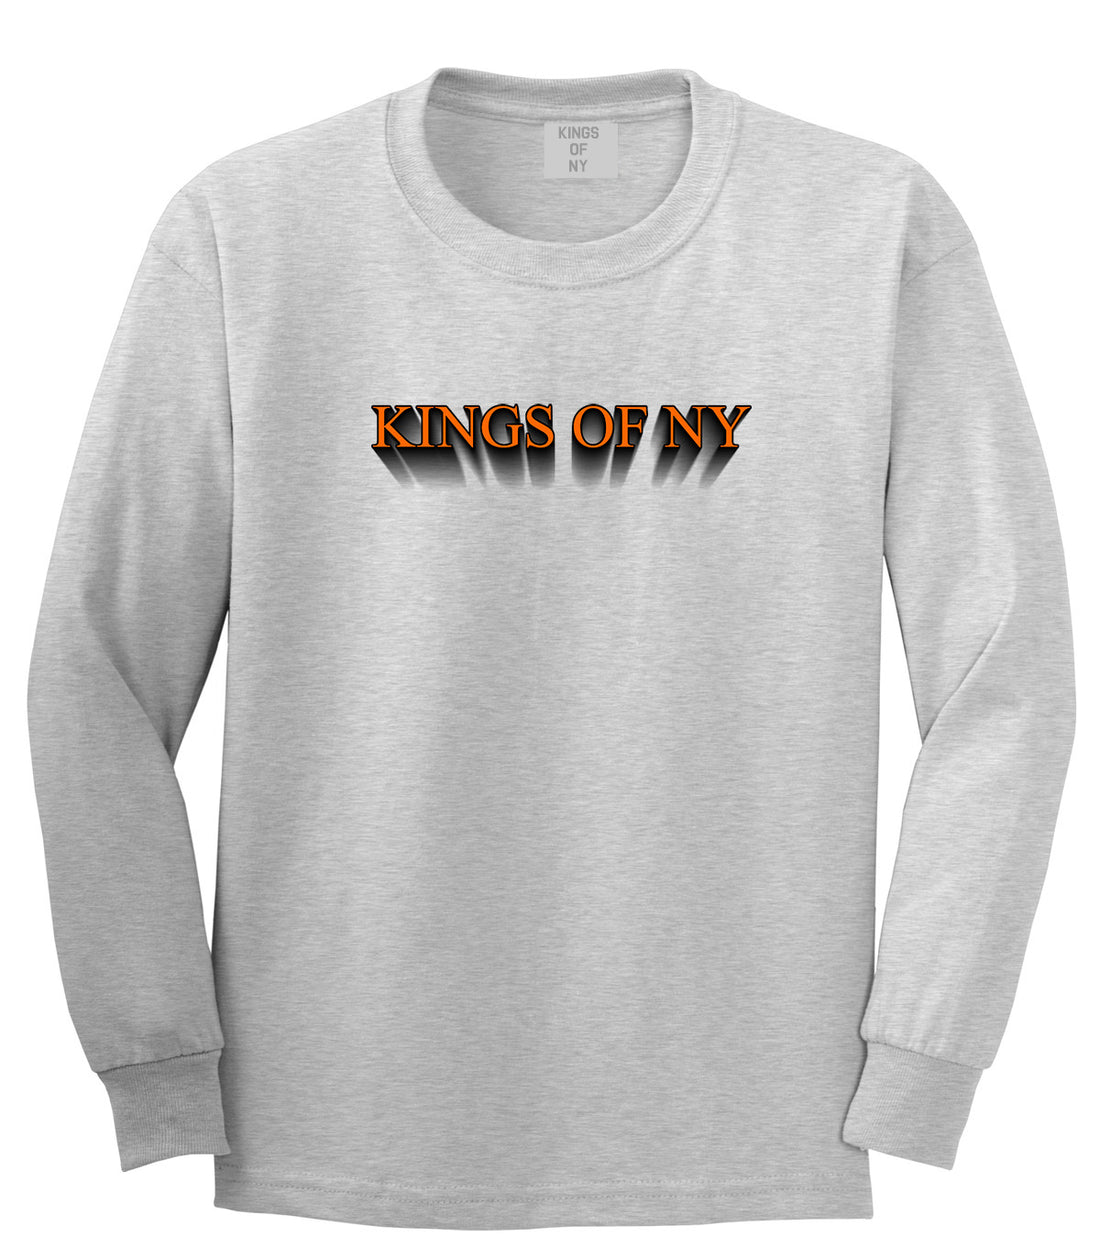 3D Text Long Sleeve T-Shirt in Grey